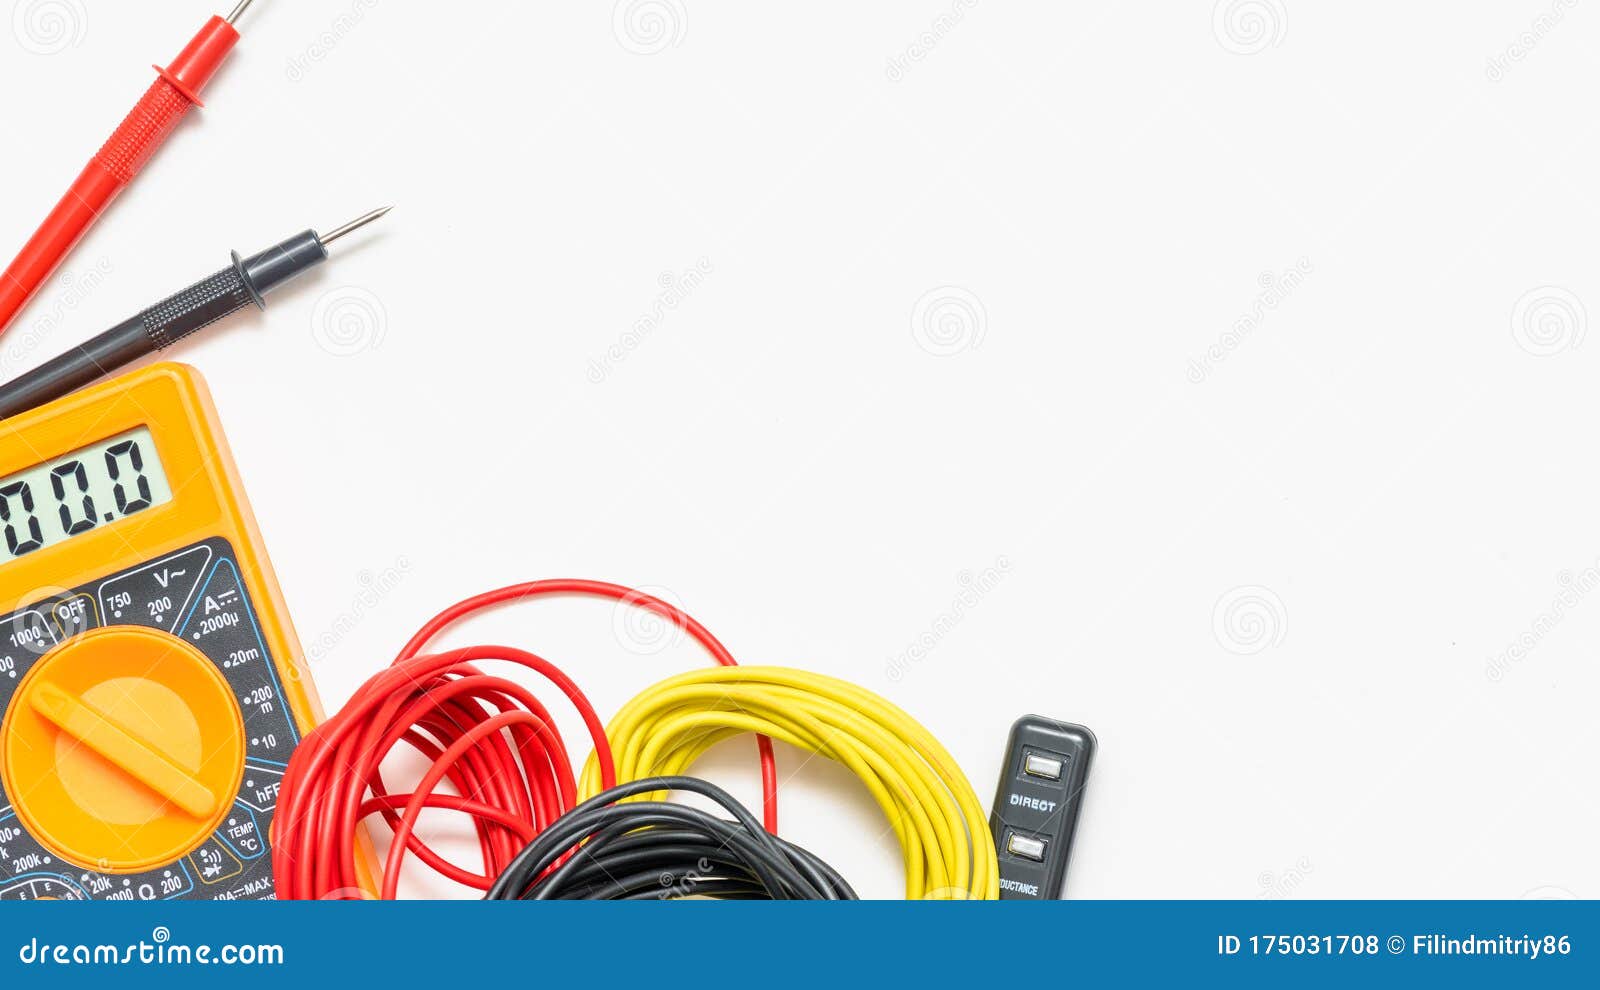 Auto electrician stock photo. Image of white, phone - 175031708